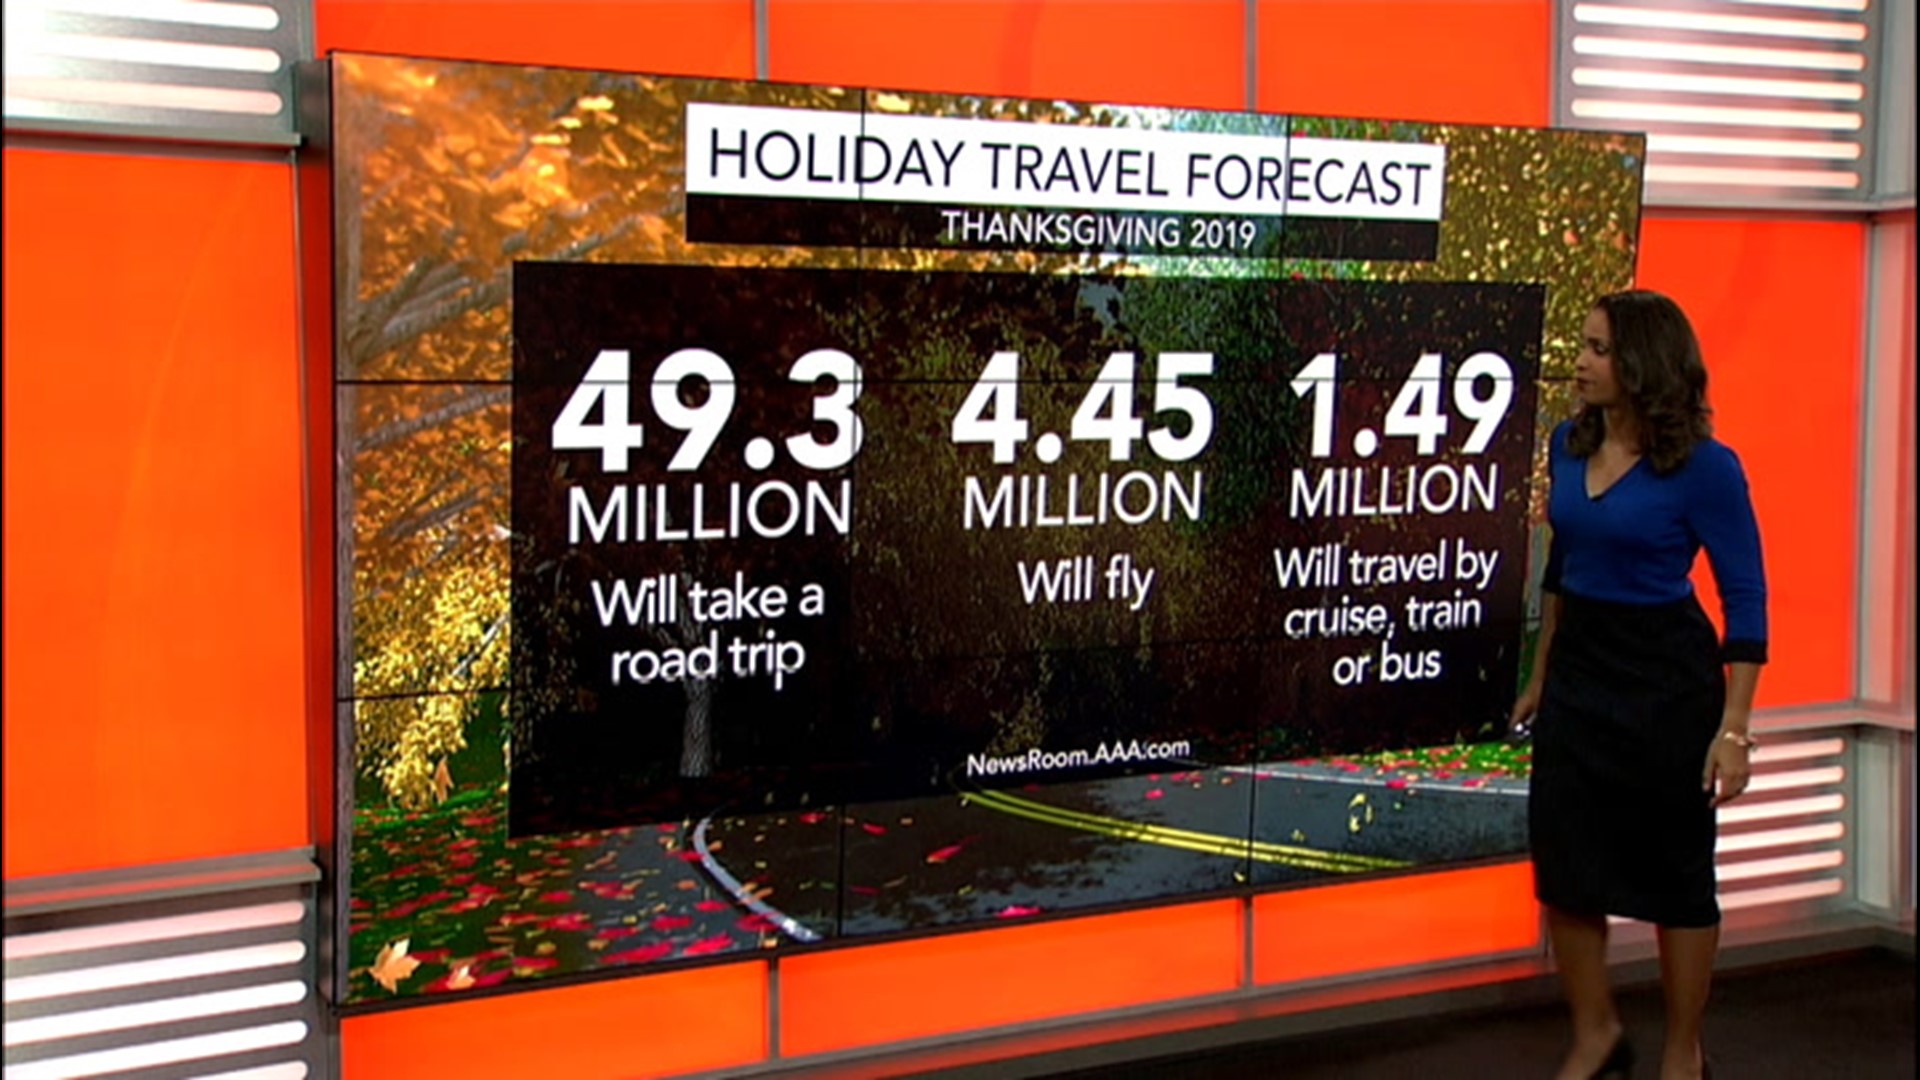 More than 55 million people are set to travel ahead of Thanksgiving, but potentially stormy weather could become a significant travel factor.